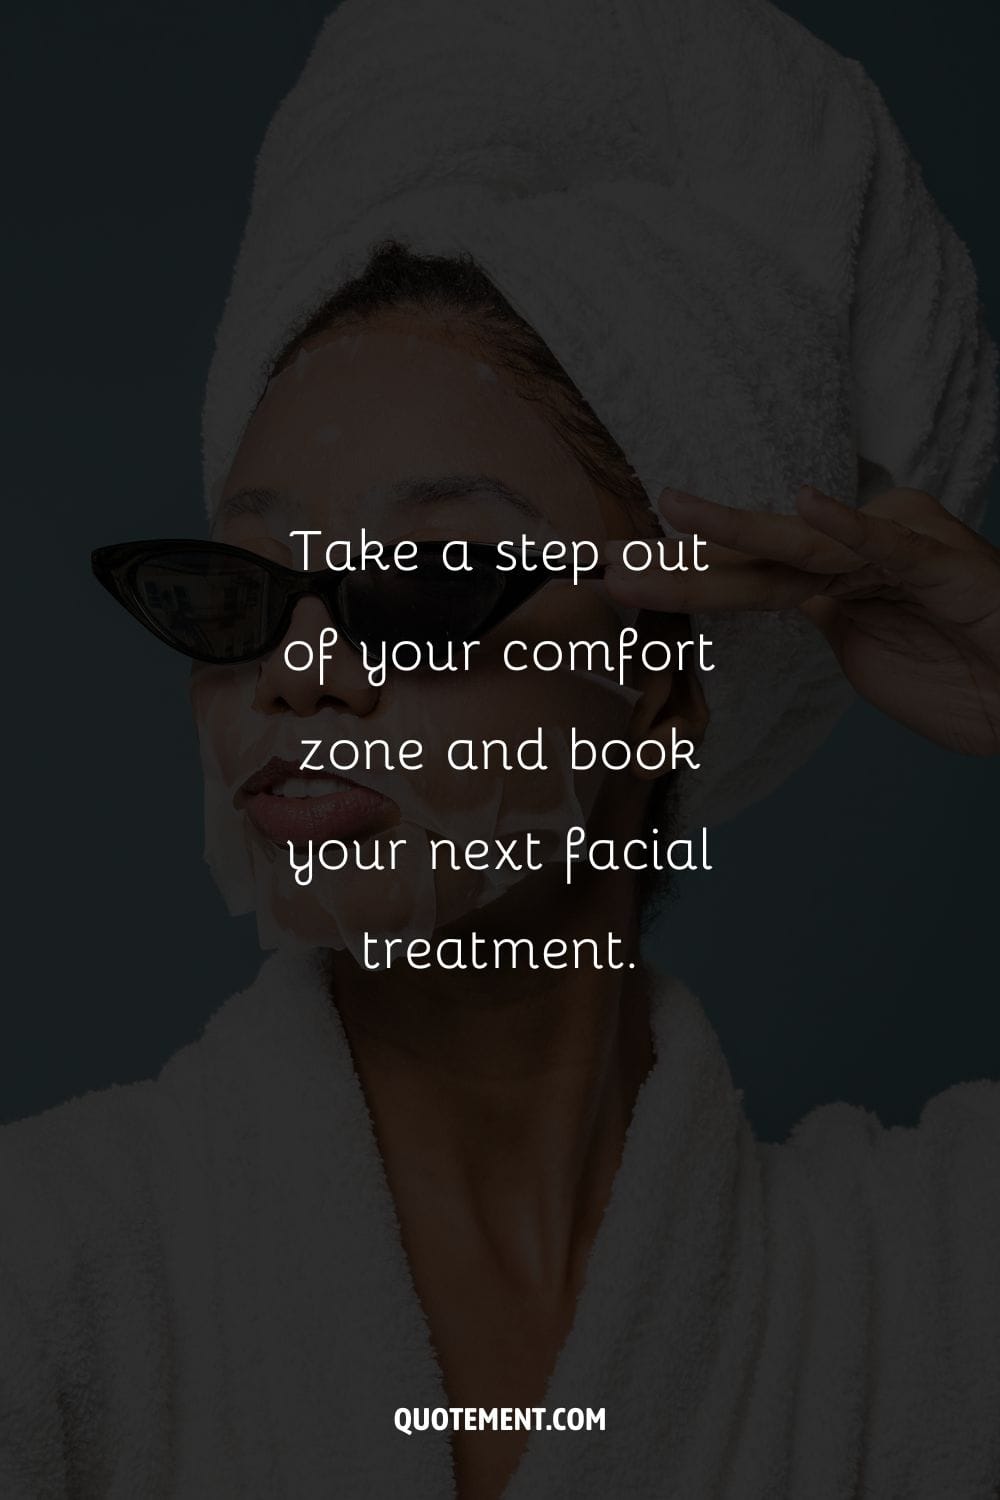 Take a step out of your comfort zone and book your next facial treatment.